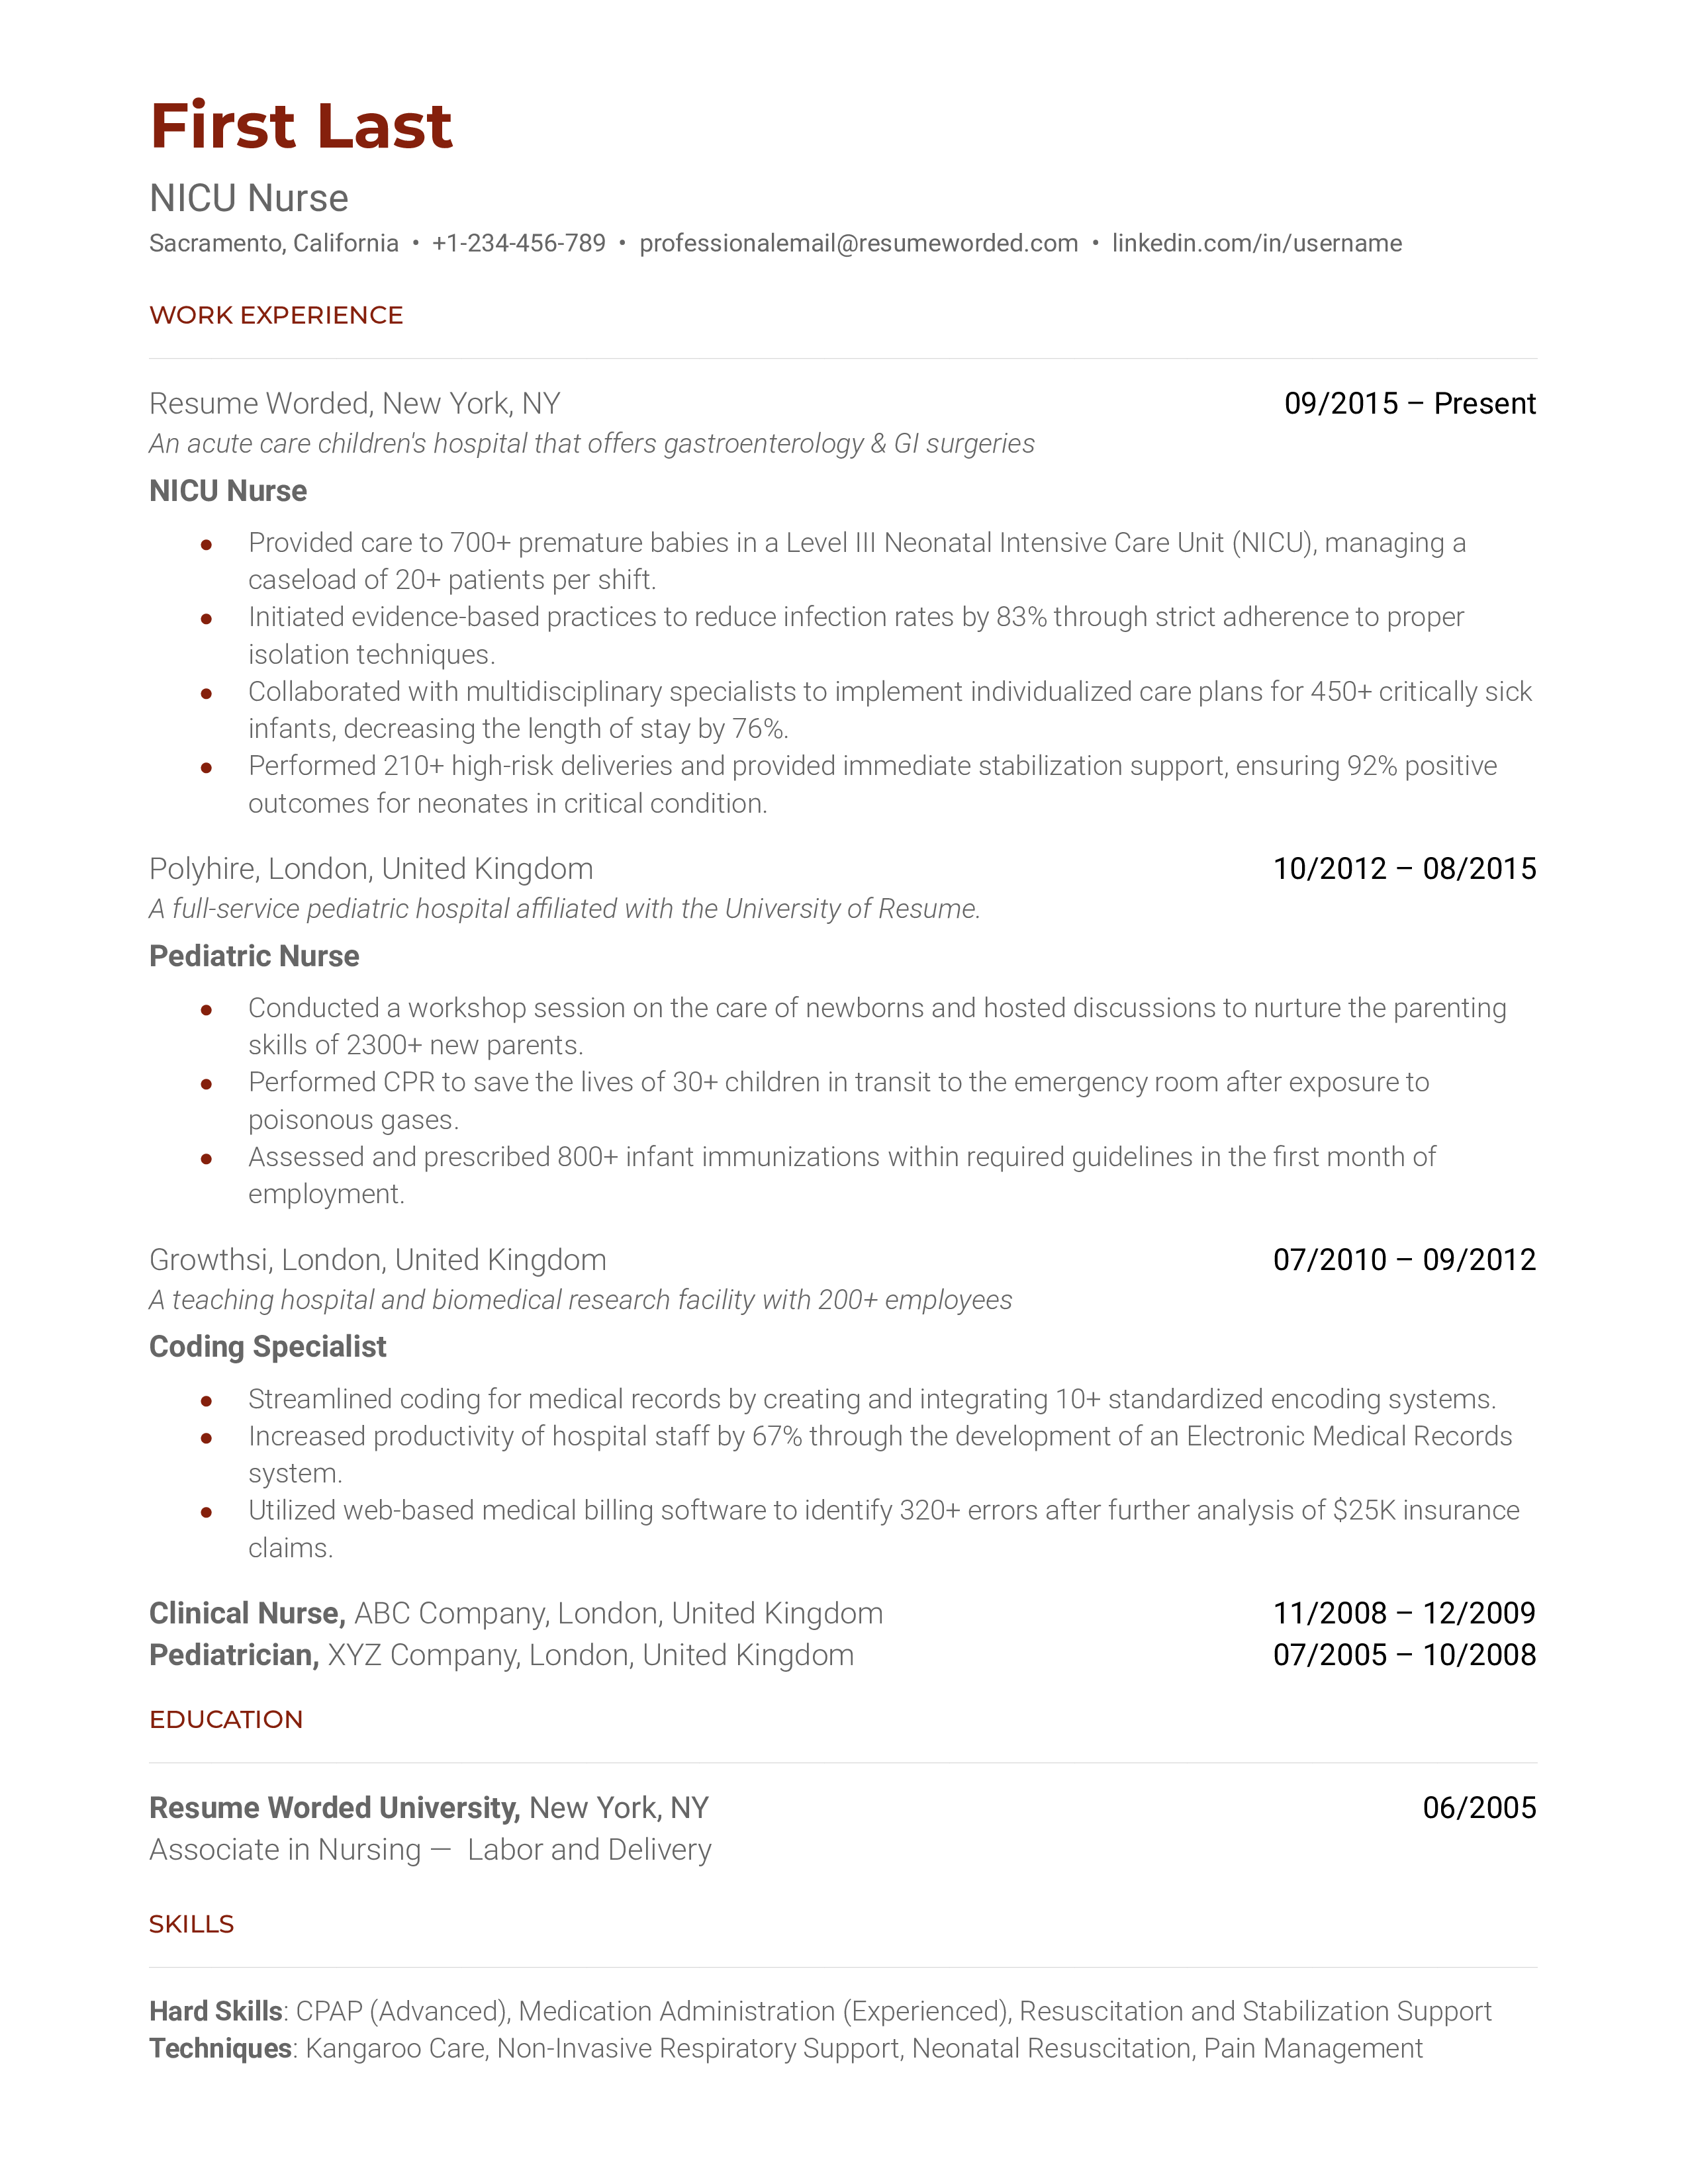 A NICU nurse's resume highlighting relevant experience and certifications